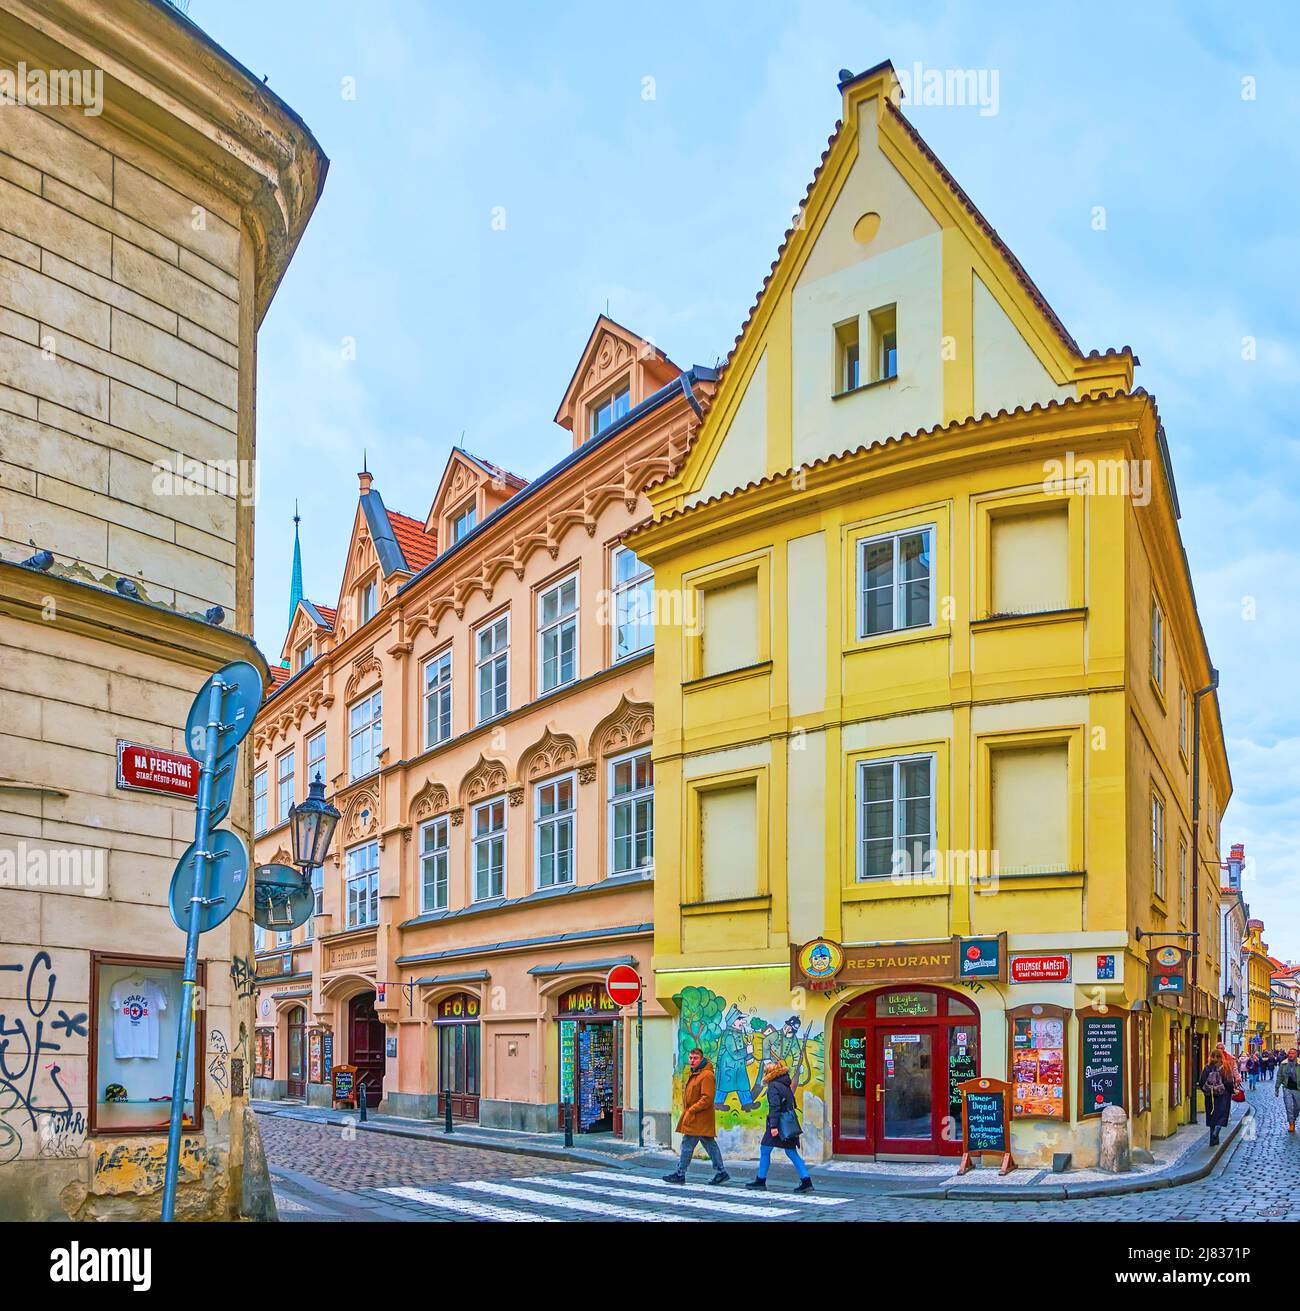 PRAGUE, CZECH REPUBLIC - MARCH 5, 2022: Panorama of Bethlehem Square with historic housing and Svejk Restaurant with colorful mural, on March 5 in Pra Stock Photo